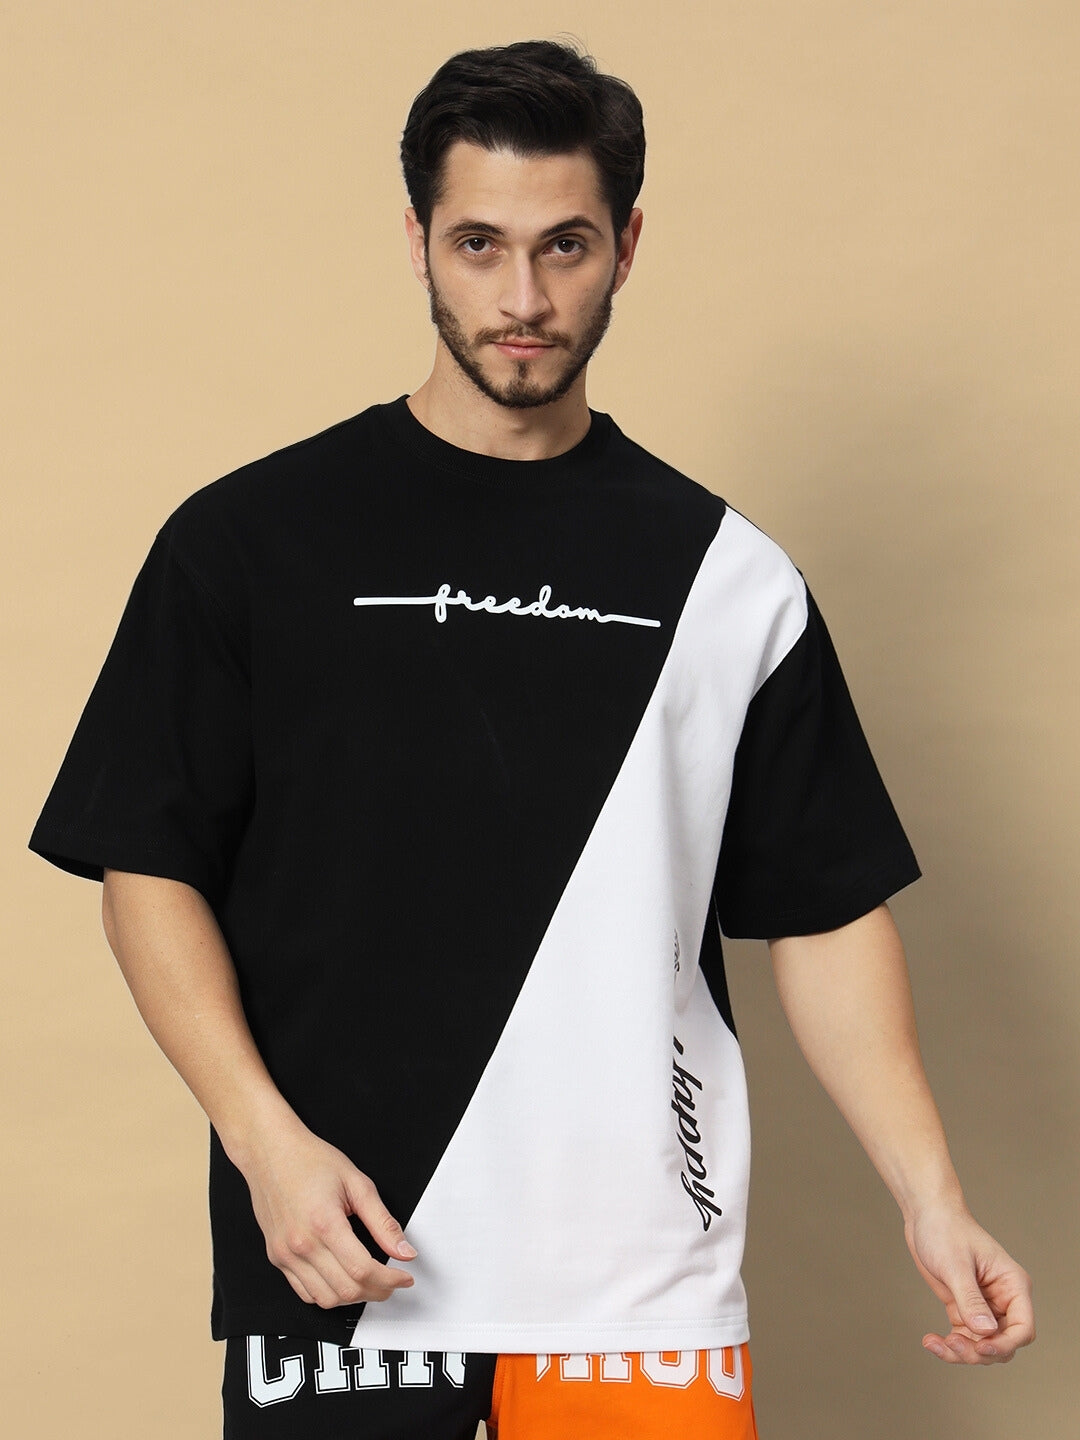 Freedom Contrast Over-Sized T-Shirt (Black-White)